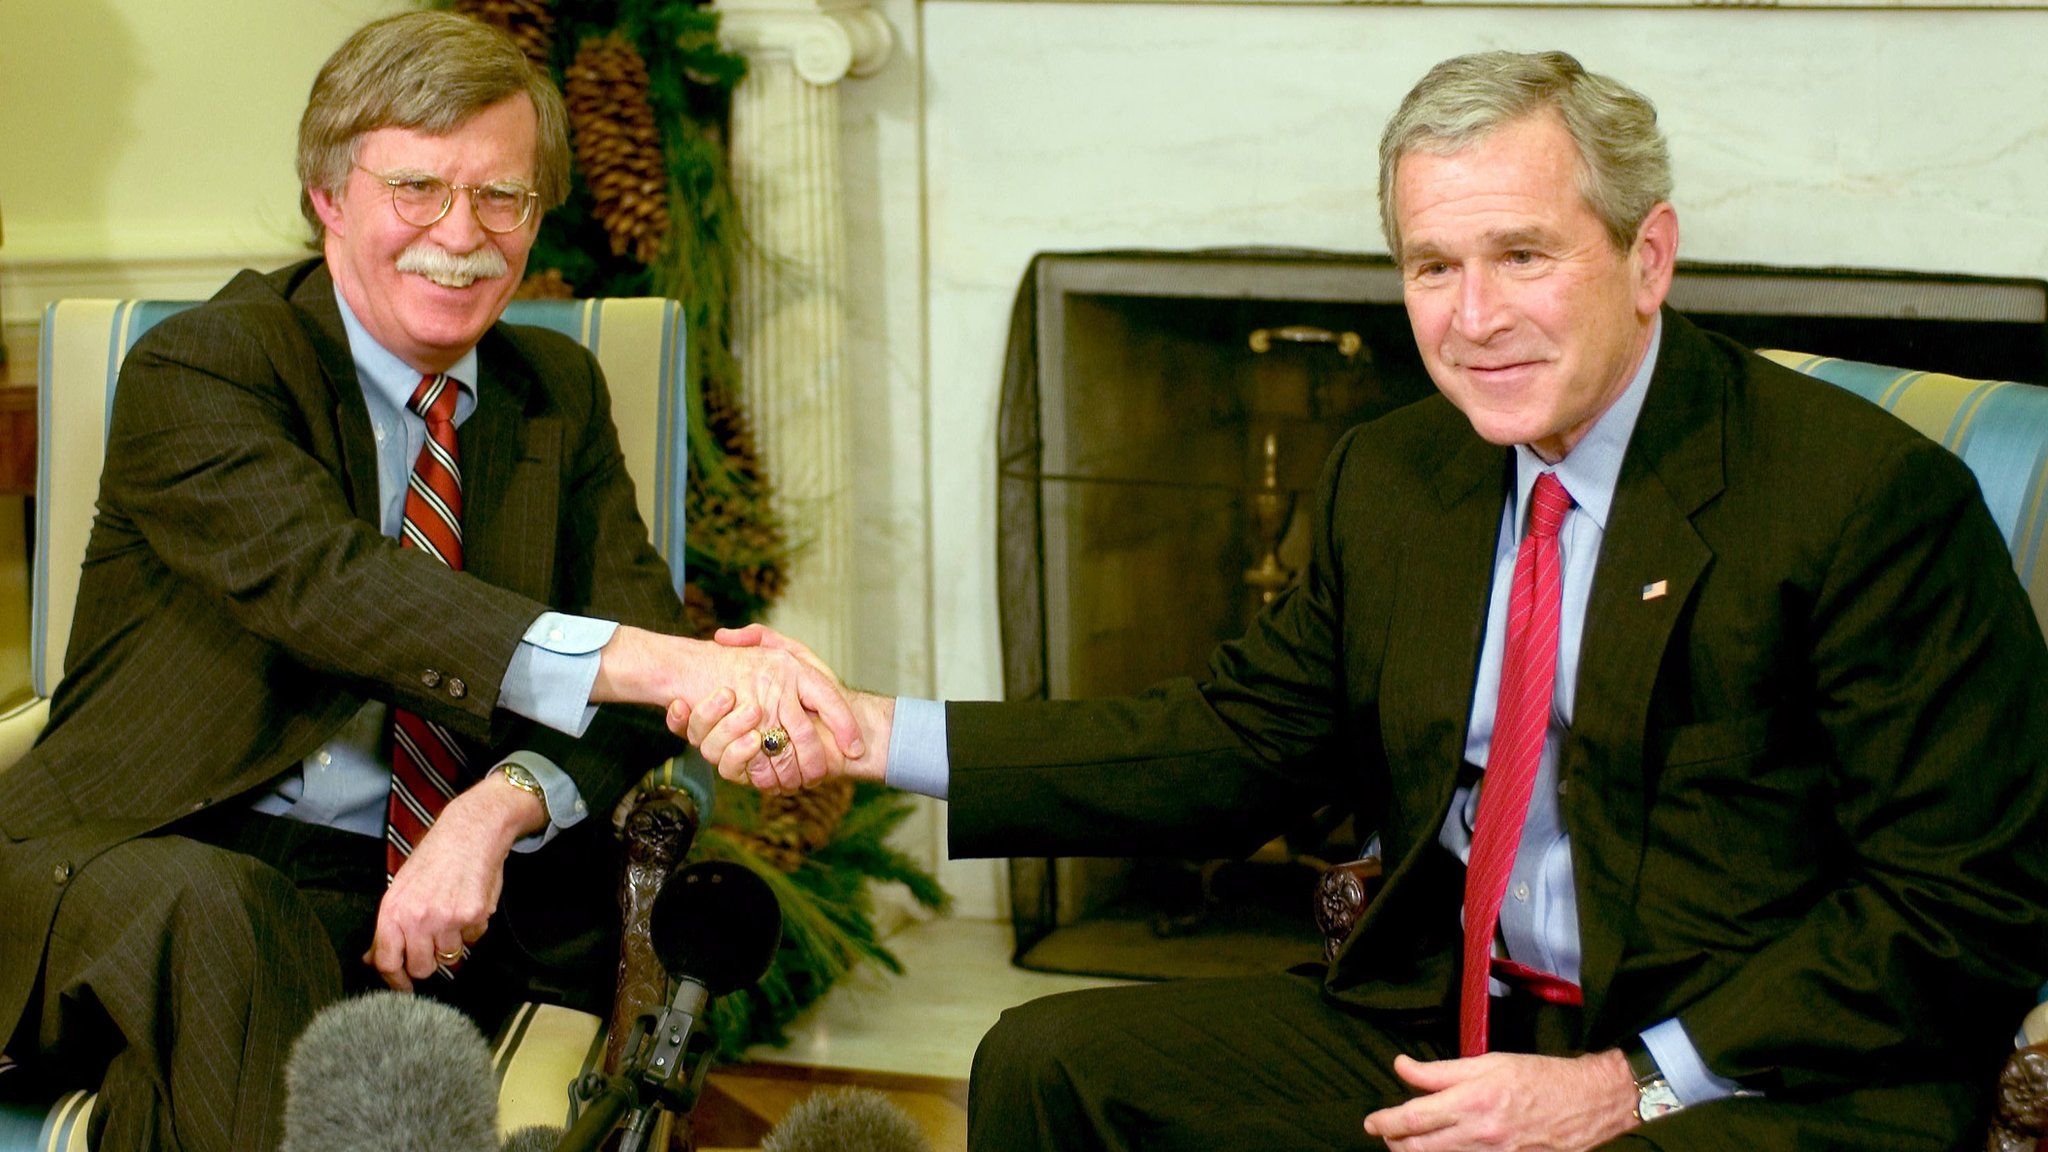 US President George W. Bush (R) and Ambassador to the UN John Bolton (L) meet in the Oval Office of the White House December 4, 2006 in Washington, DC.